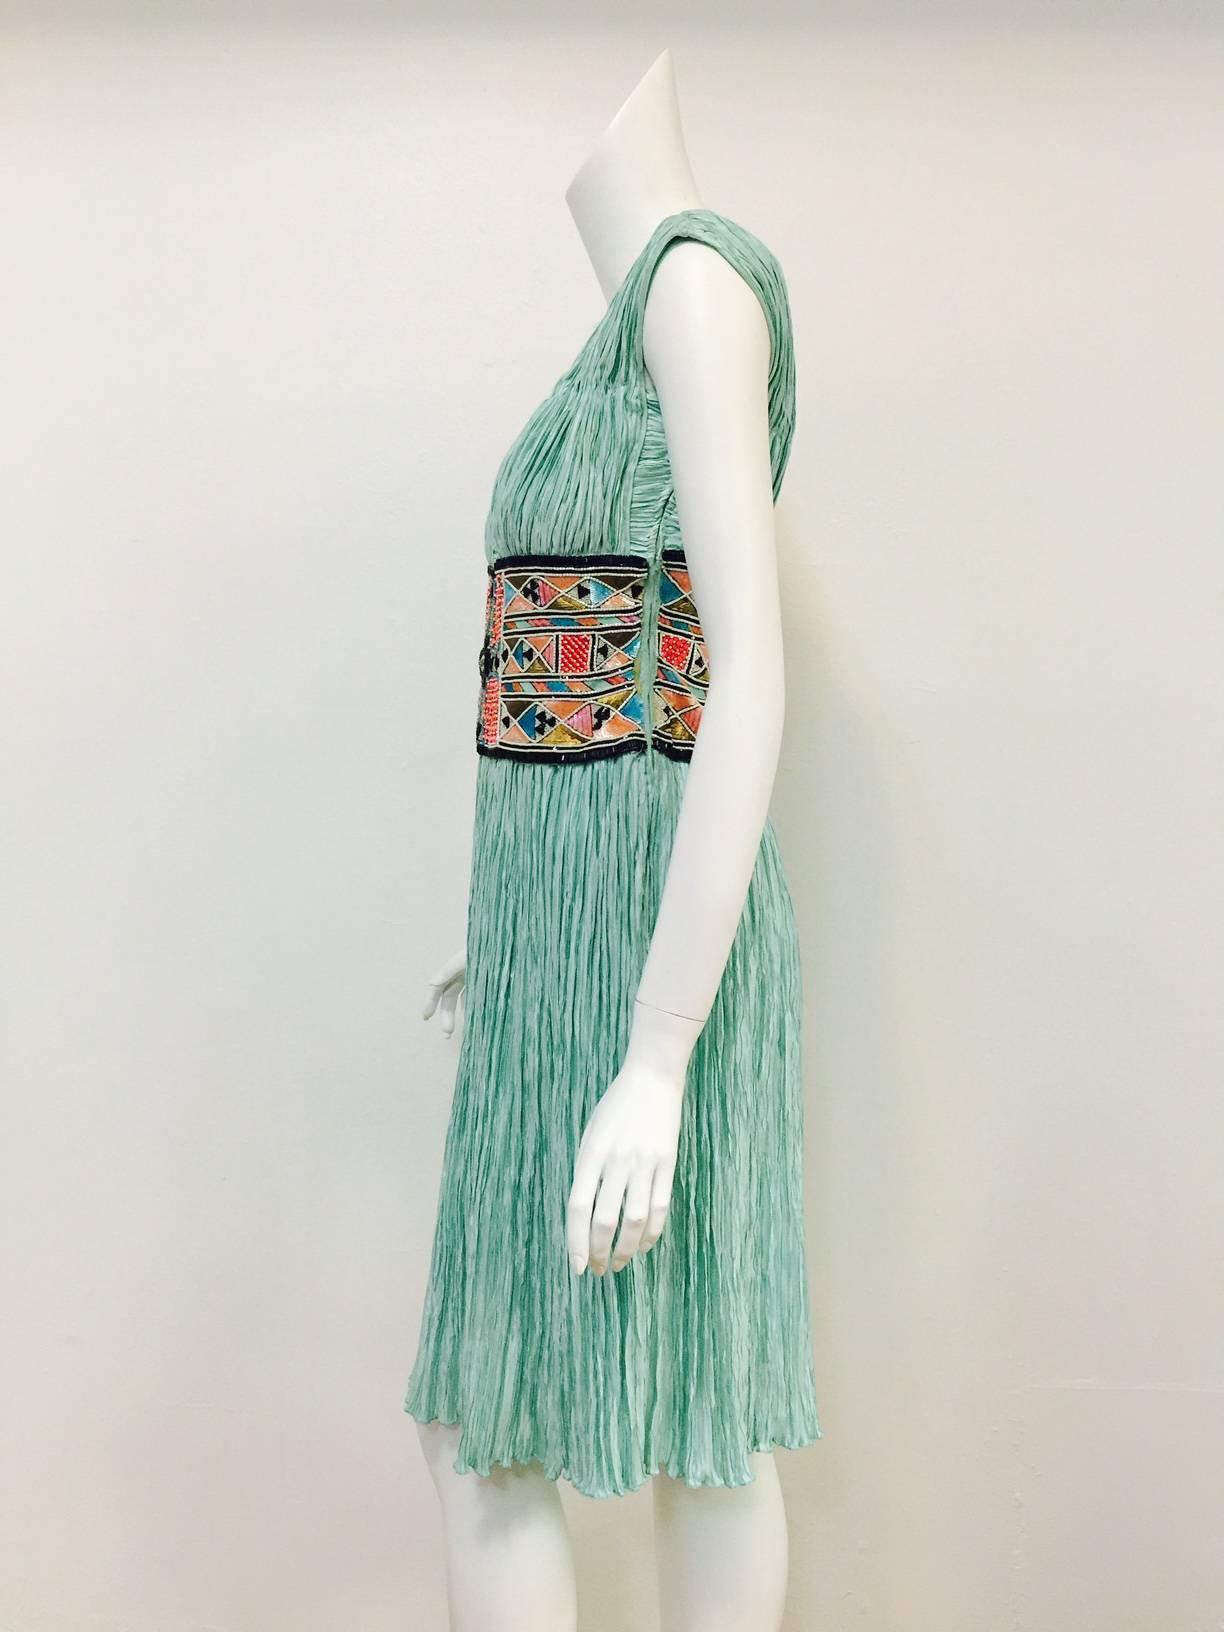 Vintage Embroidered Mint Marii Pleated Dress is a must for any connoisseur of Mary McFadden Couture!  Evoking the Goddesses of Greece, this classic design is made special through the use of McFadden's patented 